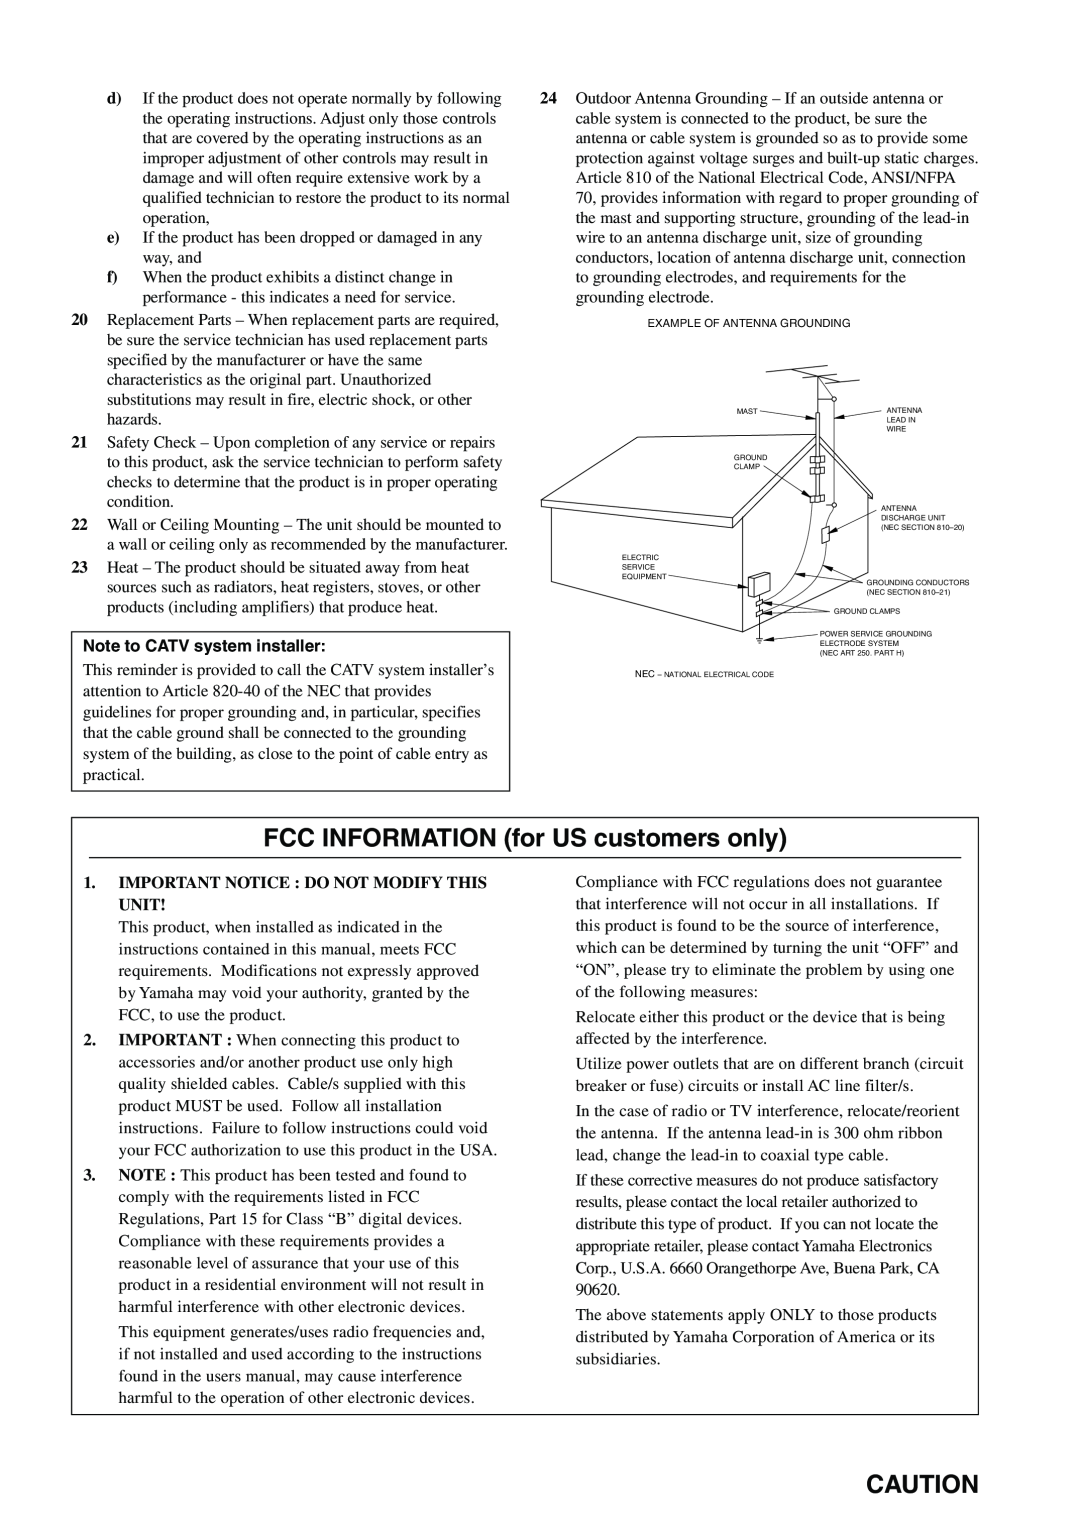 Yamaha DVX-S100 owner manual FCC INFORMATION for US customers only, Note to CATV system installer 